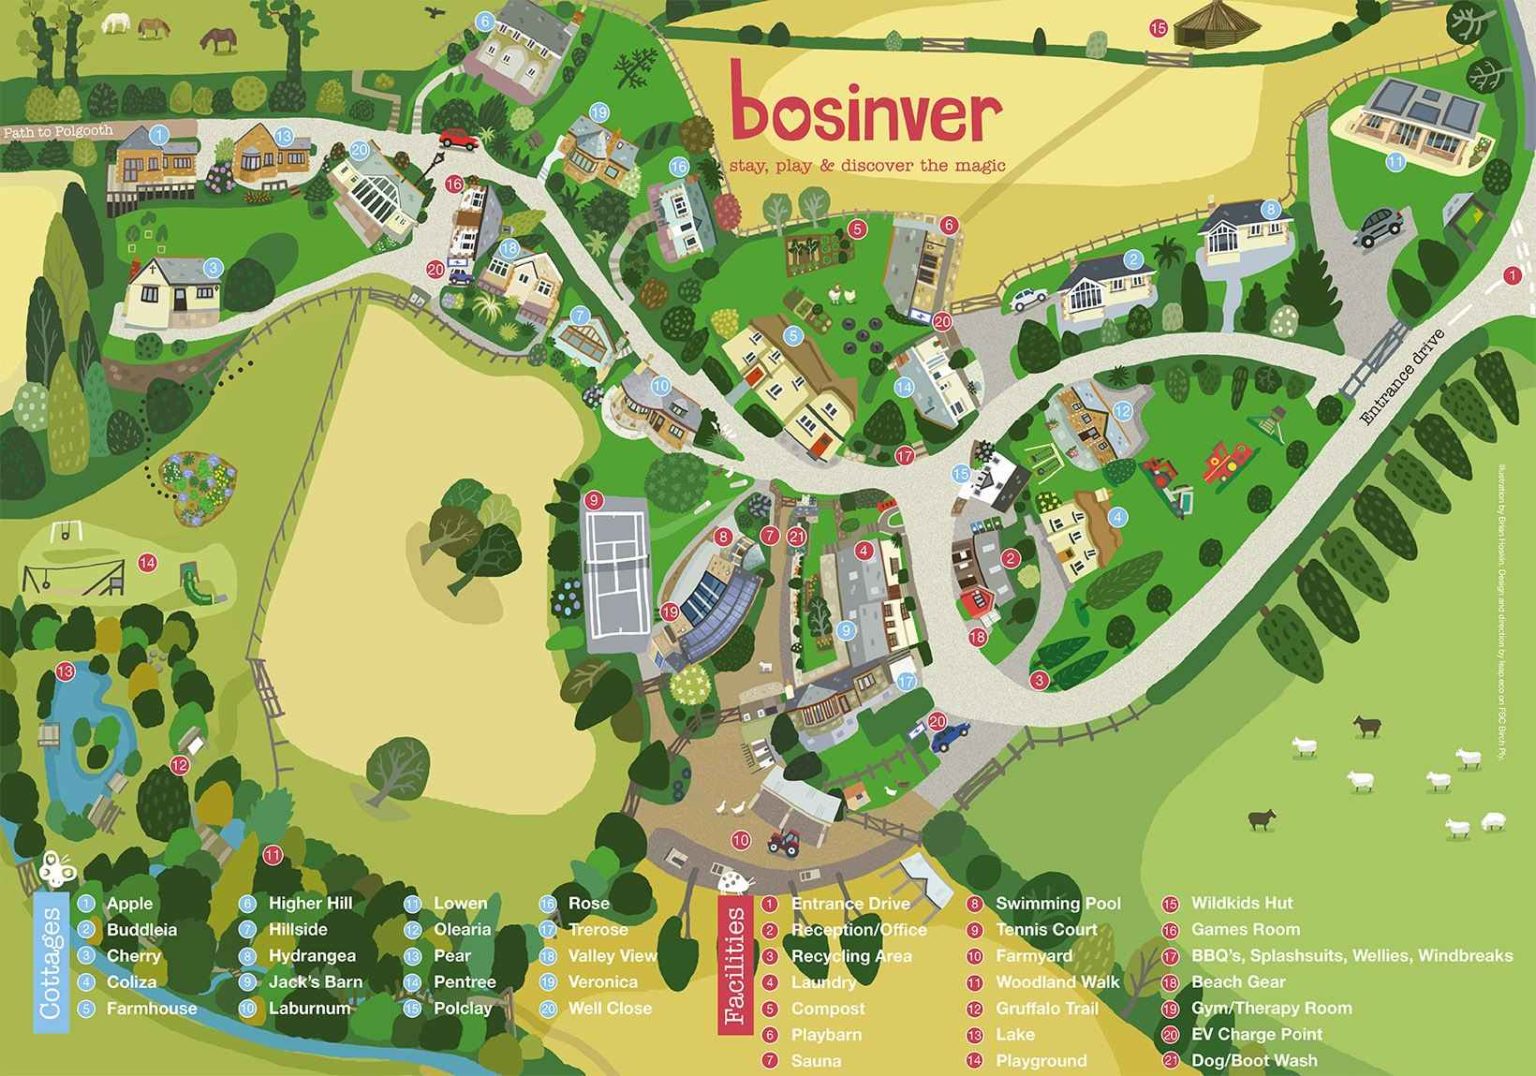 Illustrated map of the Bosinver site.